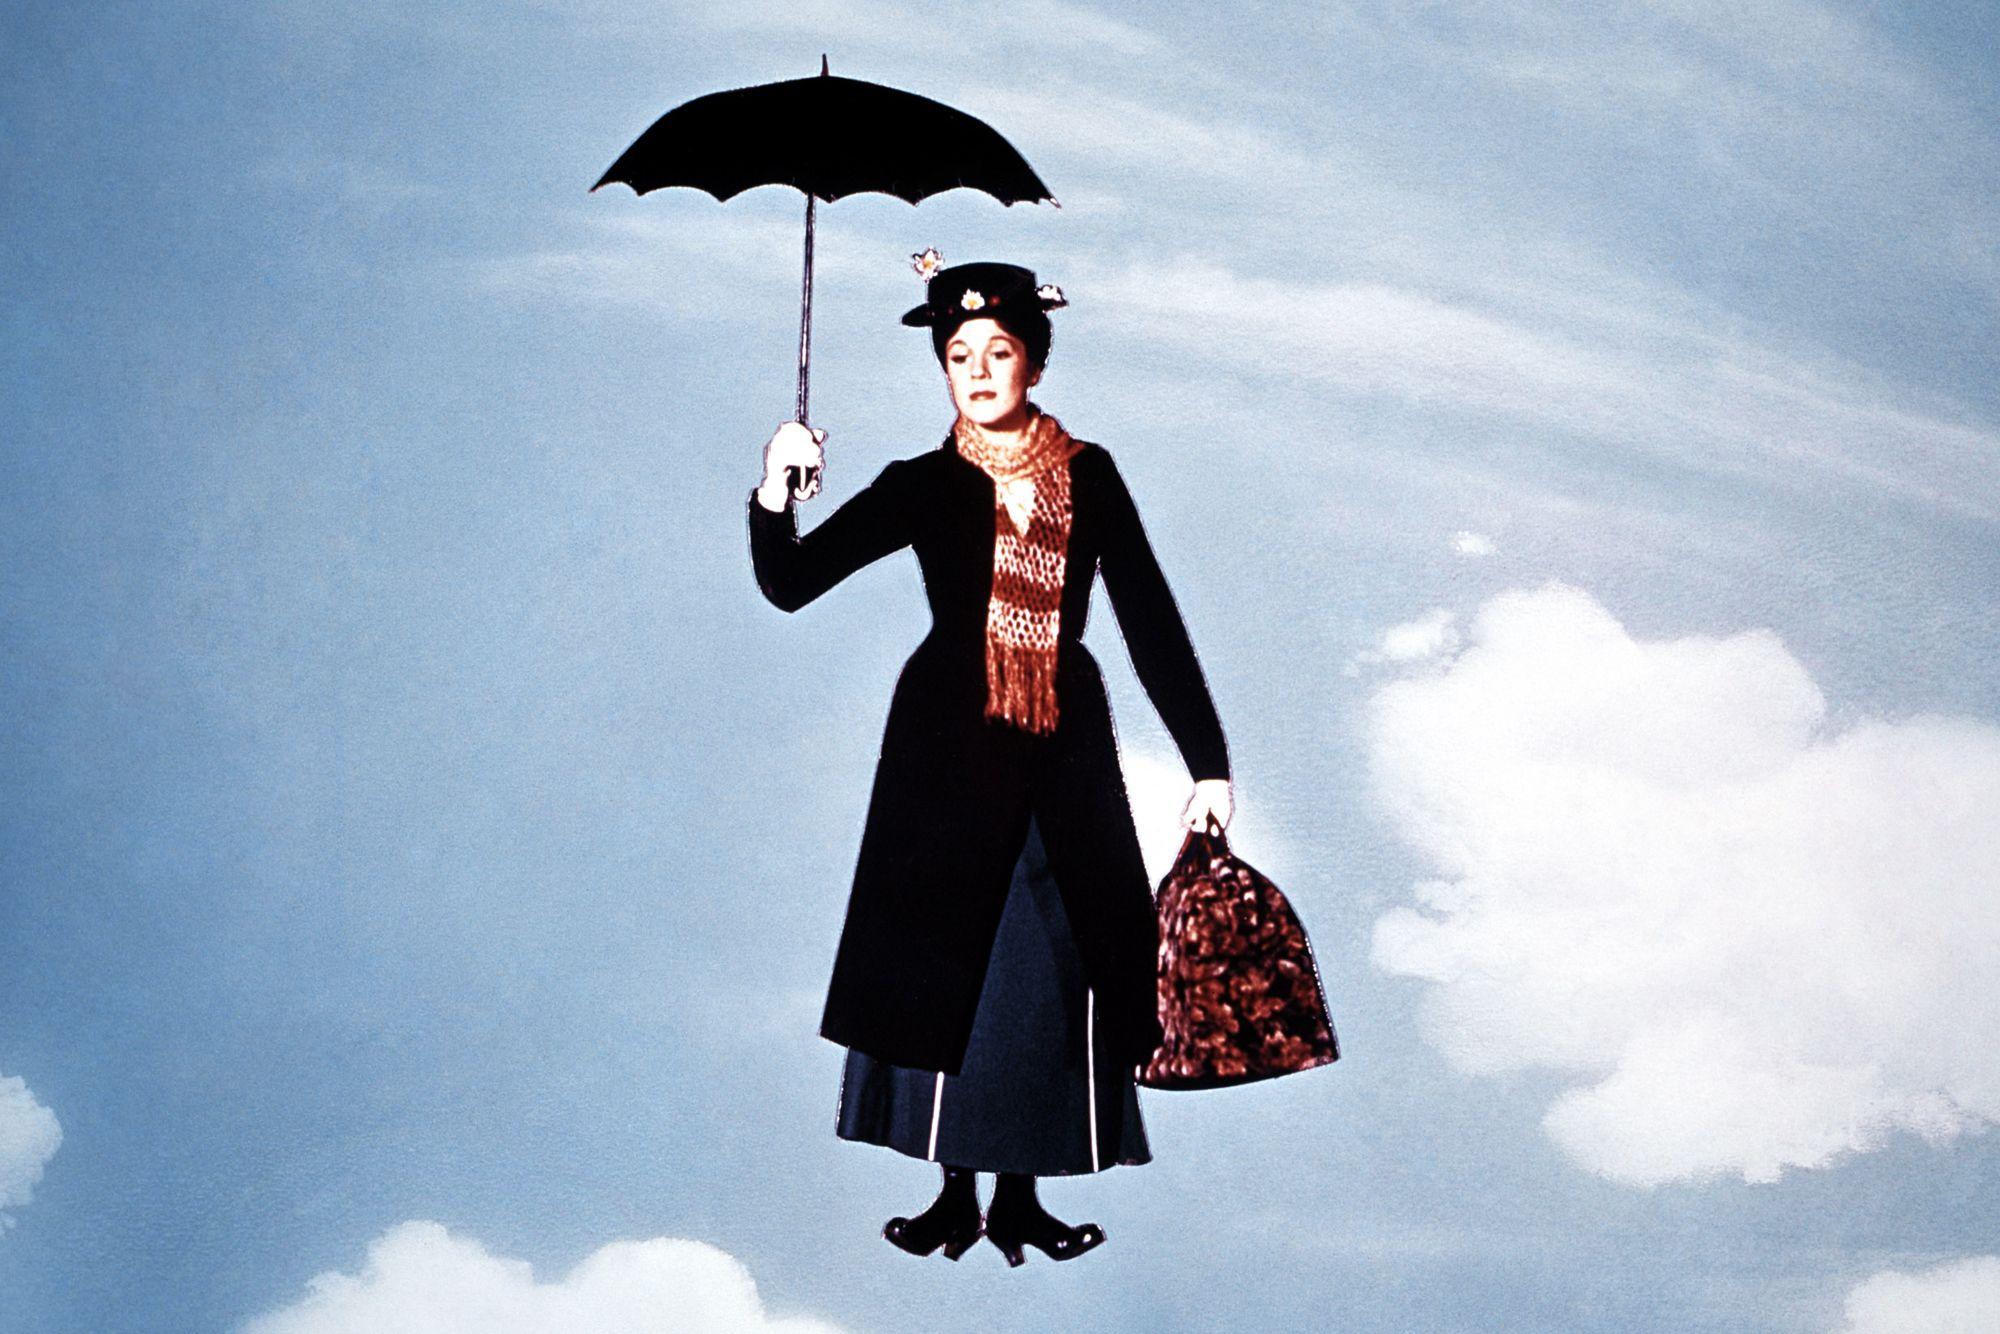 Mary Poppins wallpaper, Movie, HQ Mary Poppins pictureK